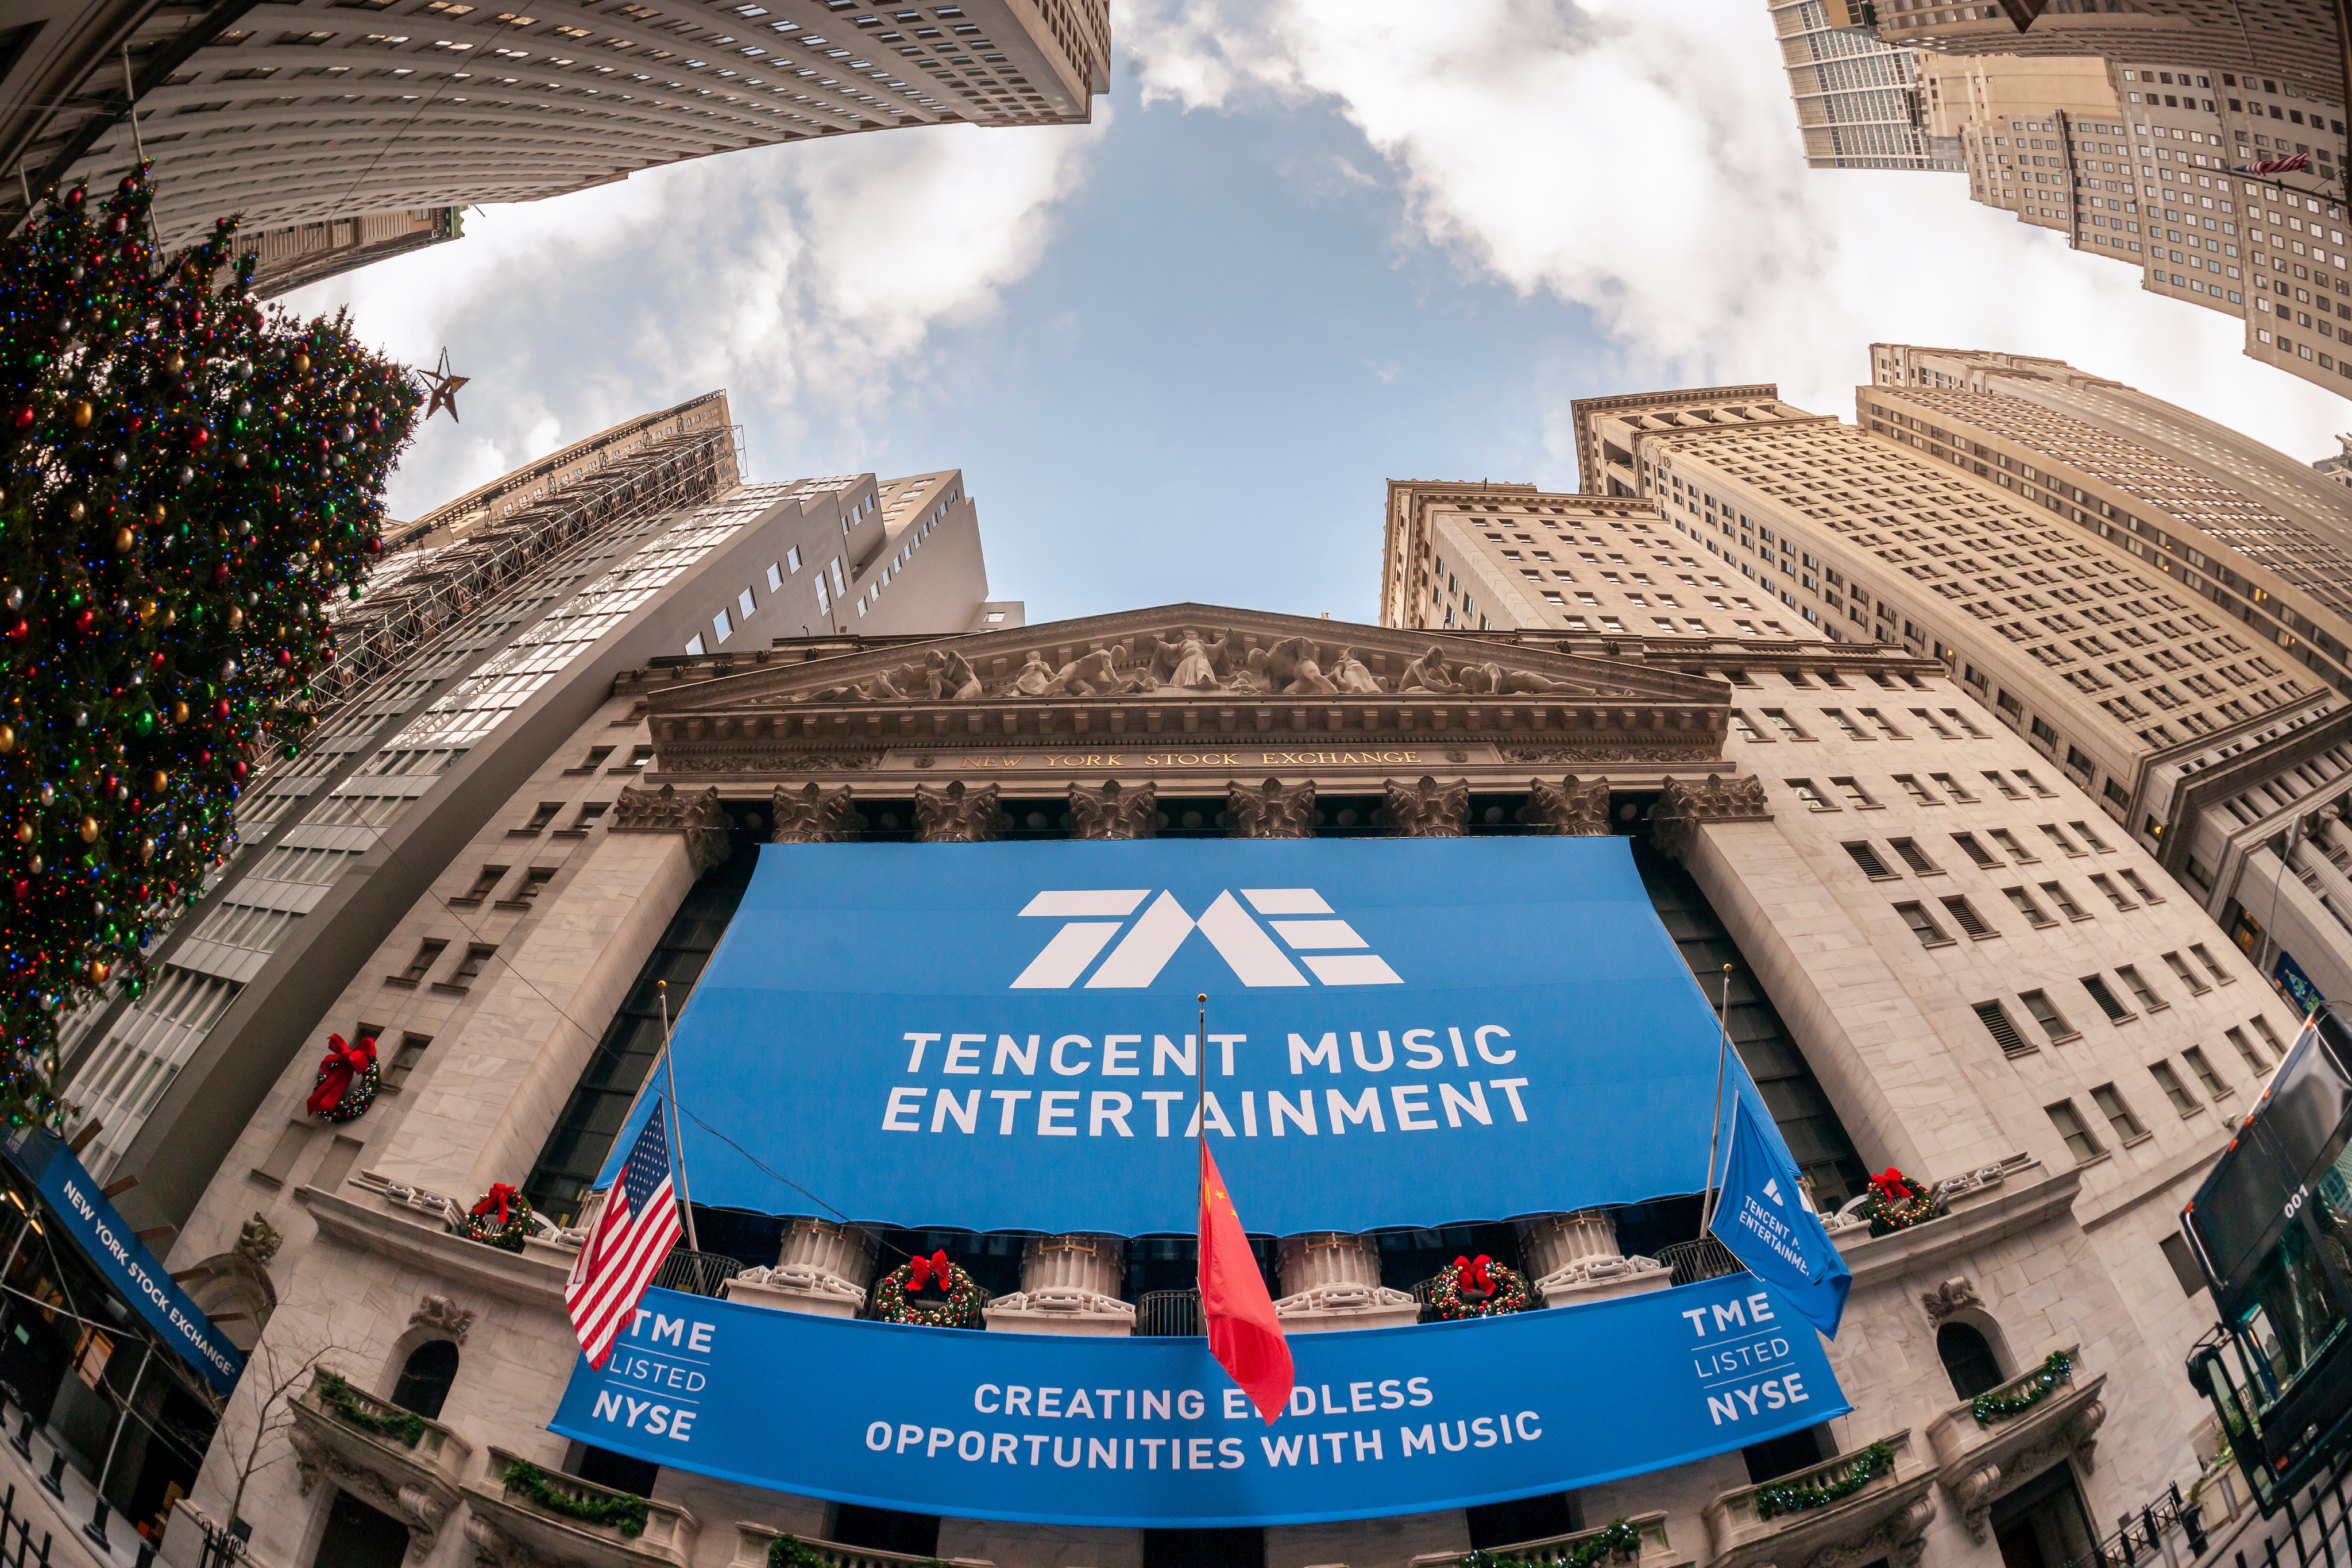 The New York Stock Exchange decorated for the trading debut of Tencent Music Entertainment on December 18, 2018. Photo: Shutterstock.